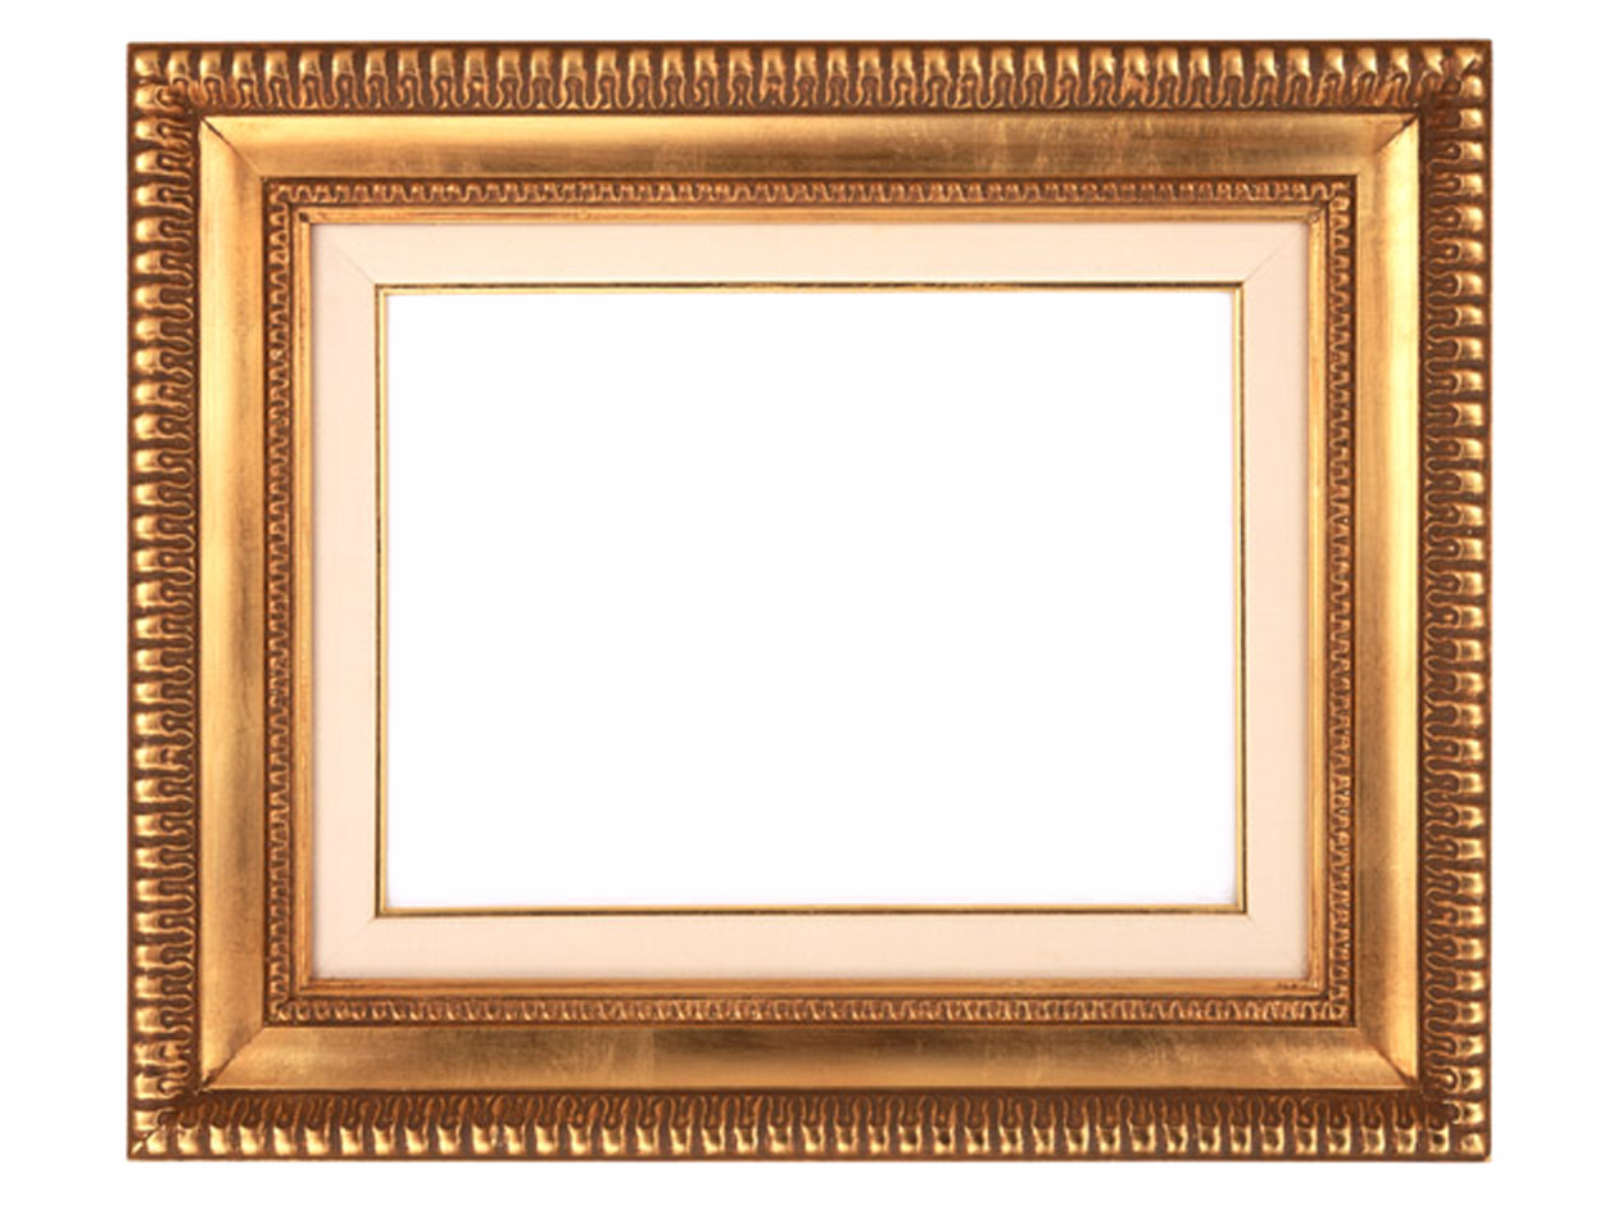 Picture Noida Frame Wood Photography Film Stock Clipart